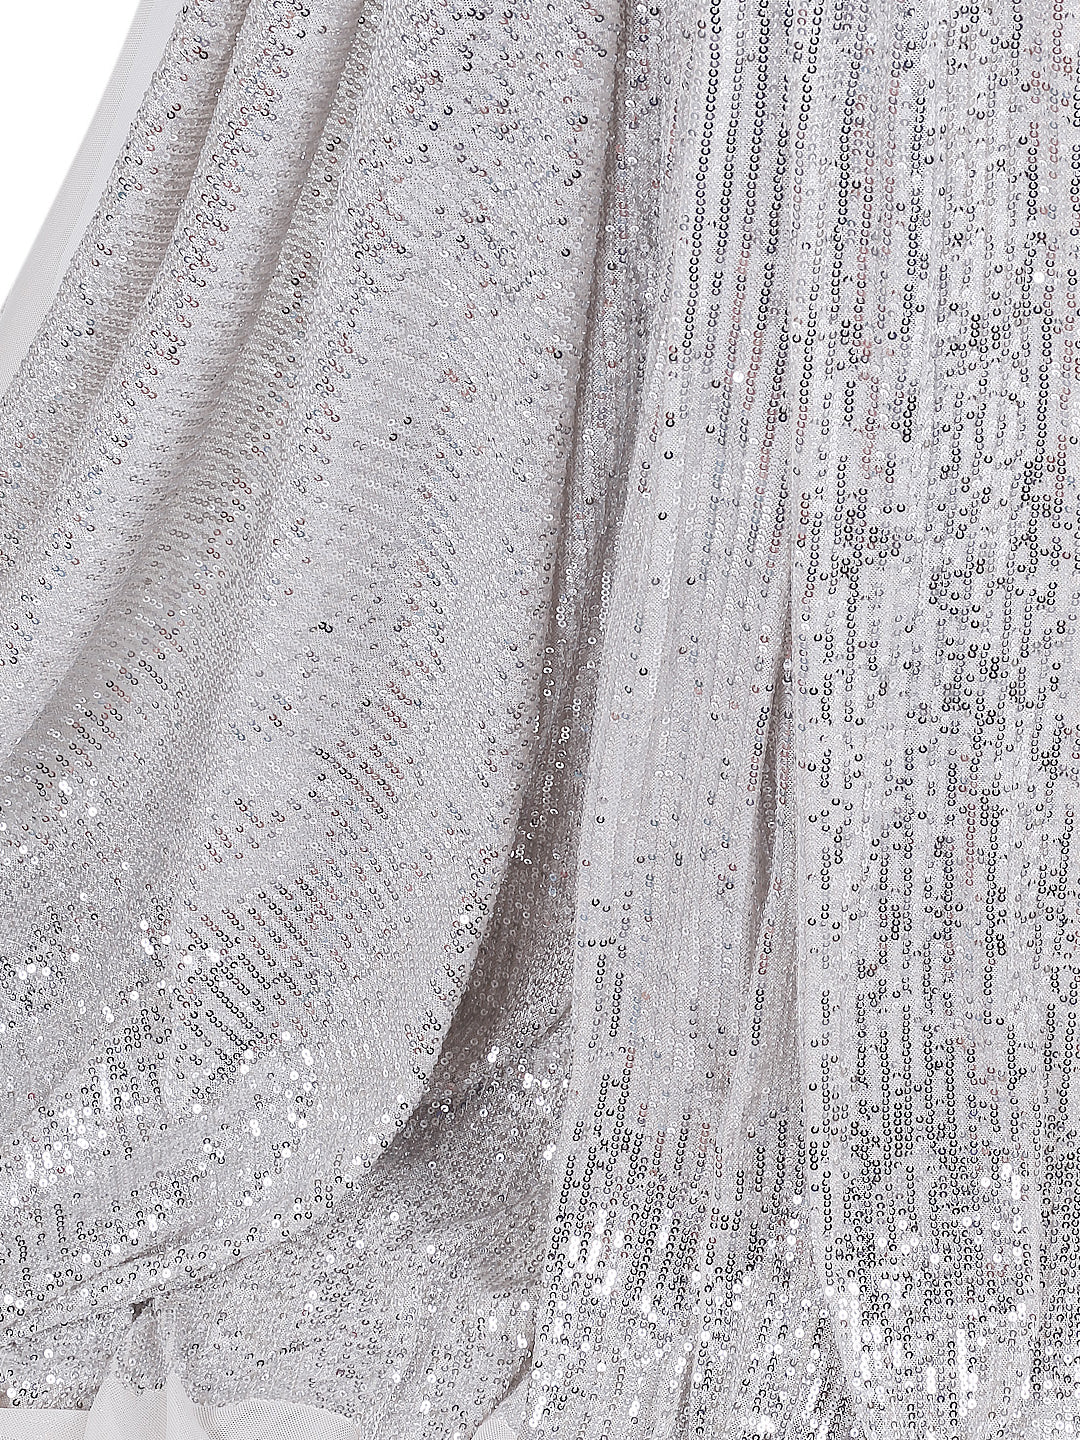 Off-white Stretchable Net Fabric With Silver Sequins